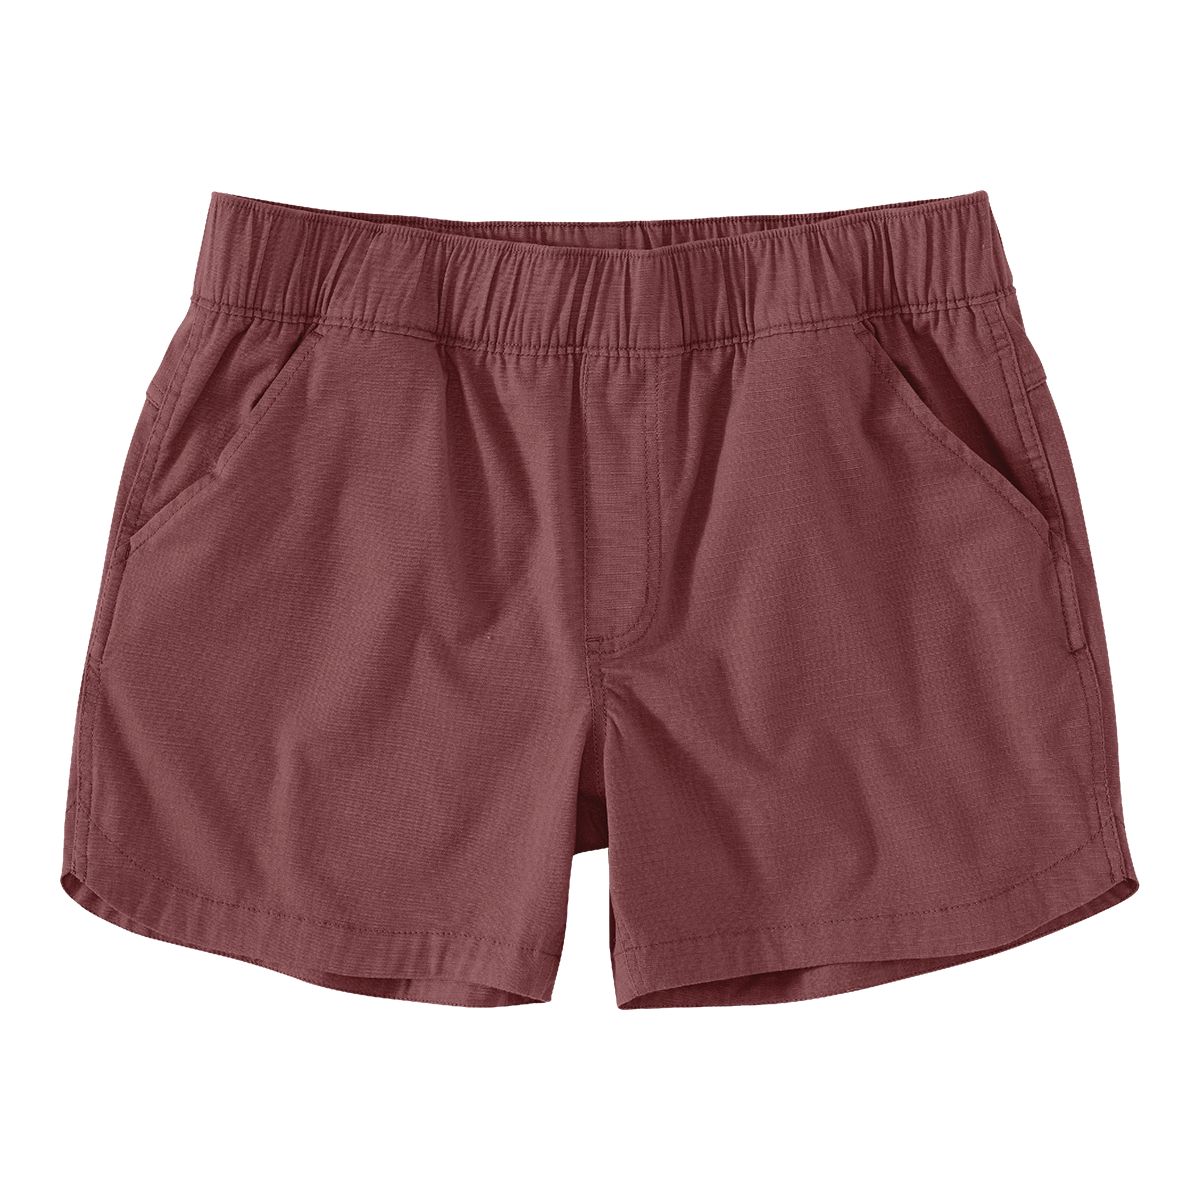 Image of Carhartt Women's Relaxed Fit Ripstop Work Shorts